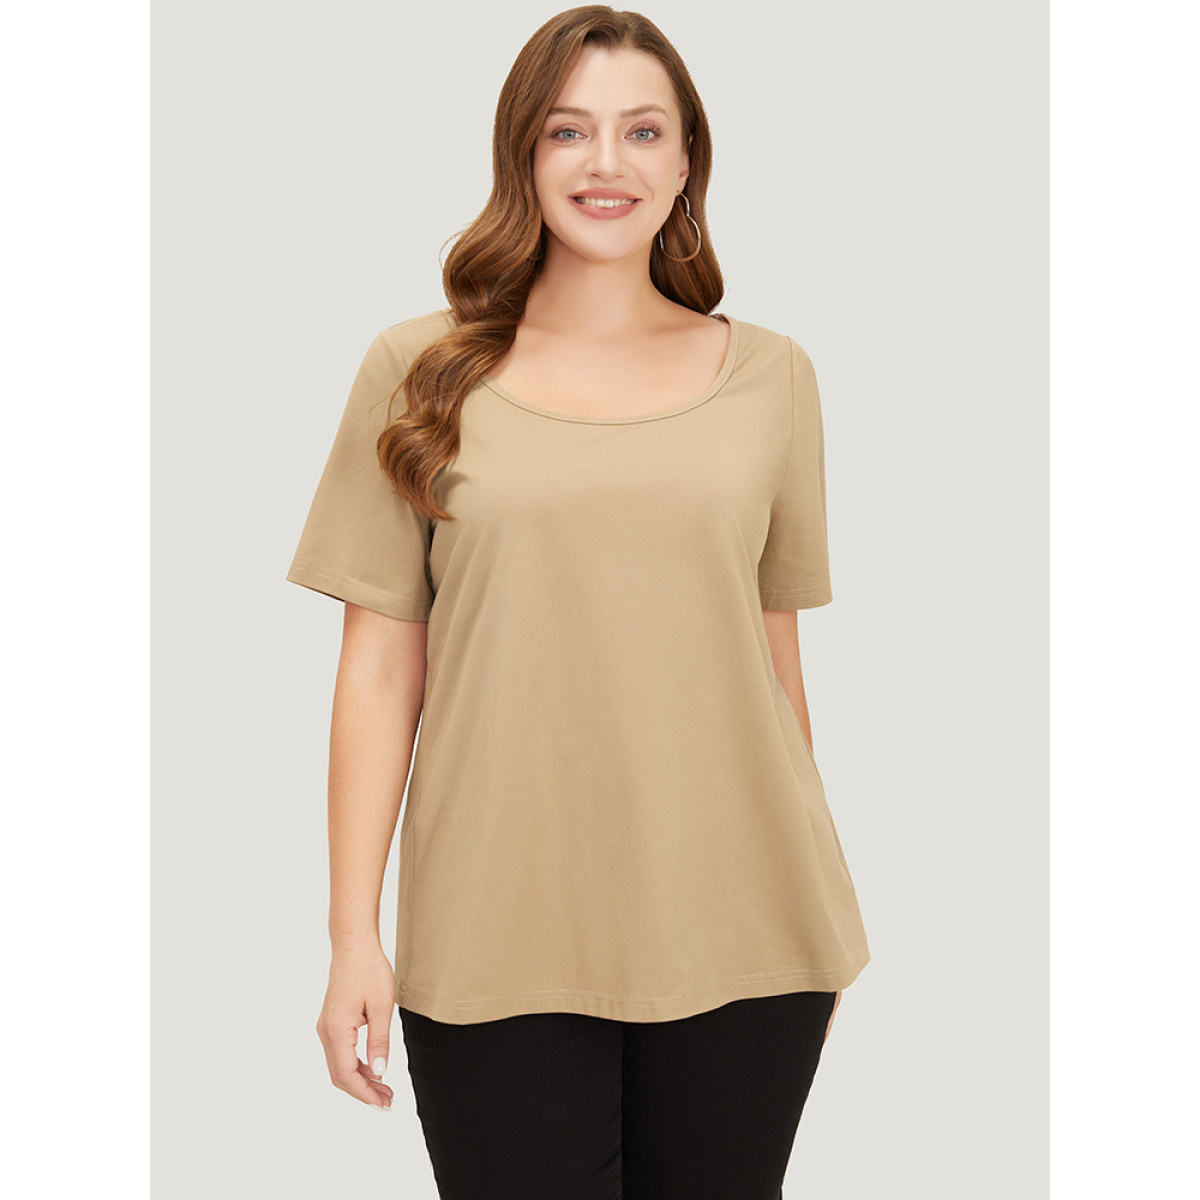 

Plus Size UltraCool Solid Scoop Neck Slightly Stretchy T-shirt Tan Women Basics Plain Scoop Neck Dailywear T-shirts BloomChic